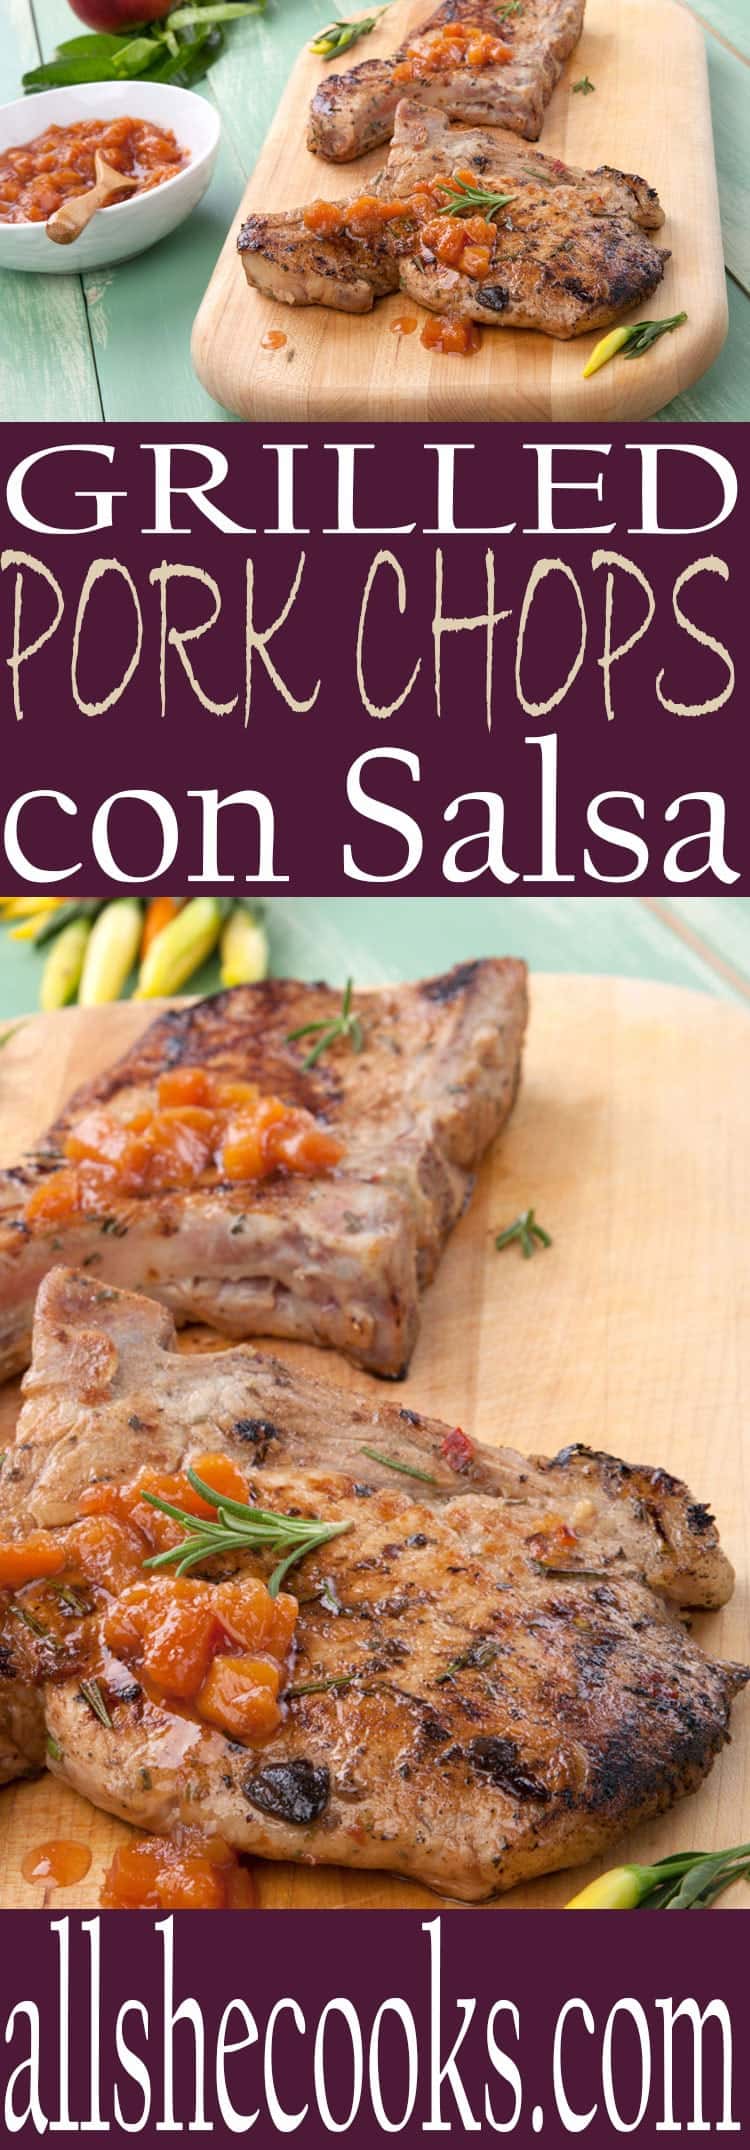 This easy pork chops recipe is a perfect warm weather recipe. Make this on the grill and you'll have pork chops con salsa ready to eat any day of the week.